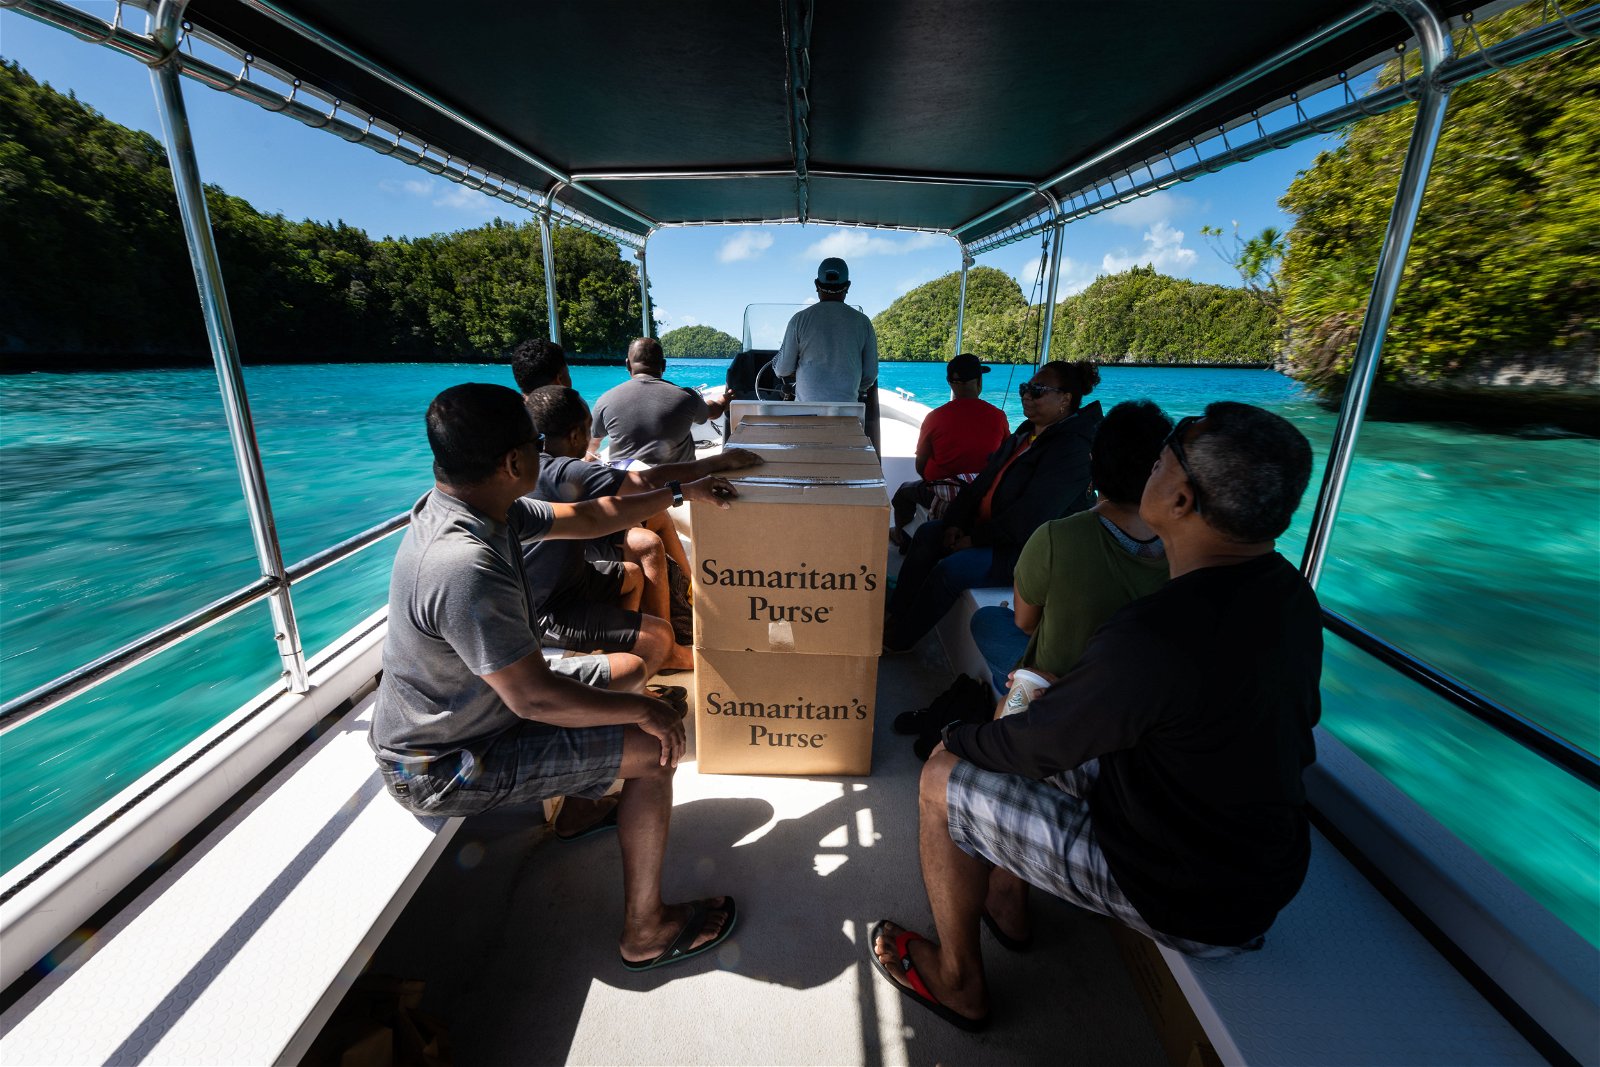 SHOEBOX GIFTS TRAVEL BY CHARTERED BOAT FROM KOROR THROUGH THE ROCK ISLANDS TO PELELIU FOR THE FIRST OUTREACH EVENT IN PALAU.